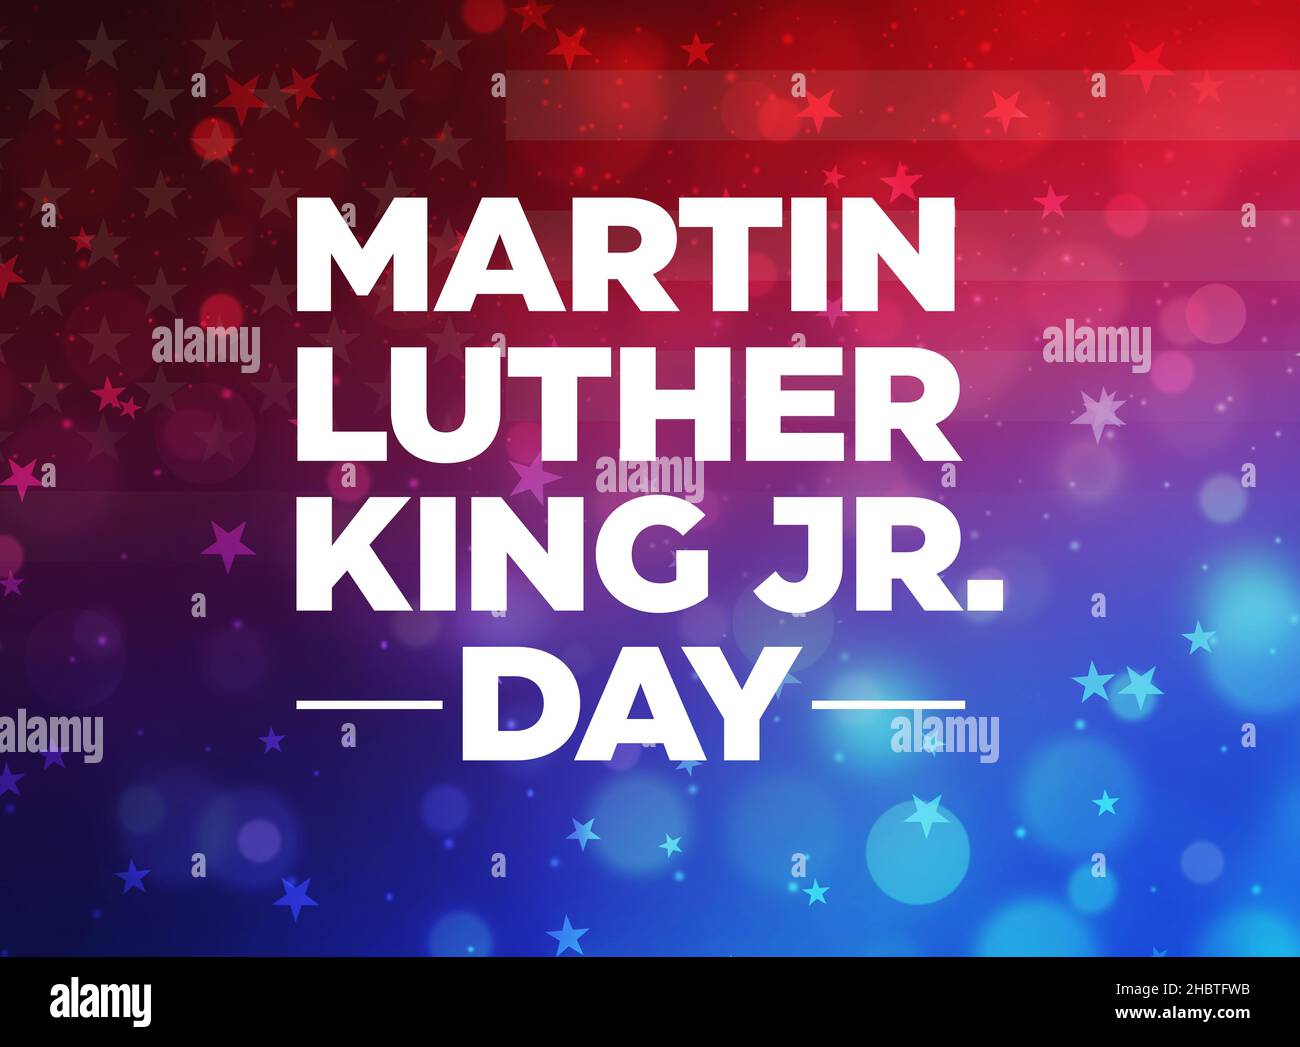 Martin Luther King Jr. Day Abstract Patriotic Background. United States ...